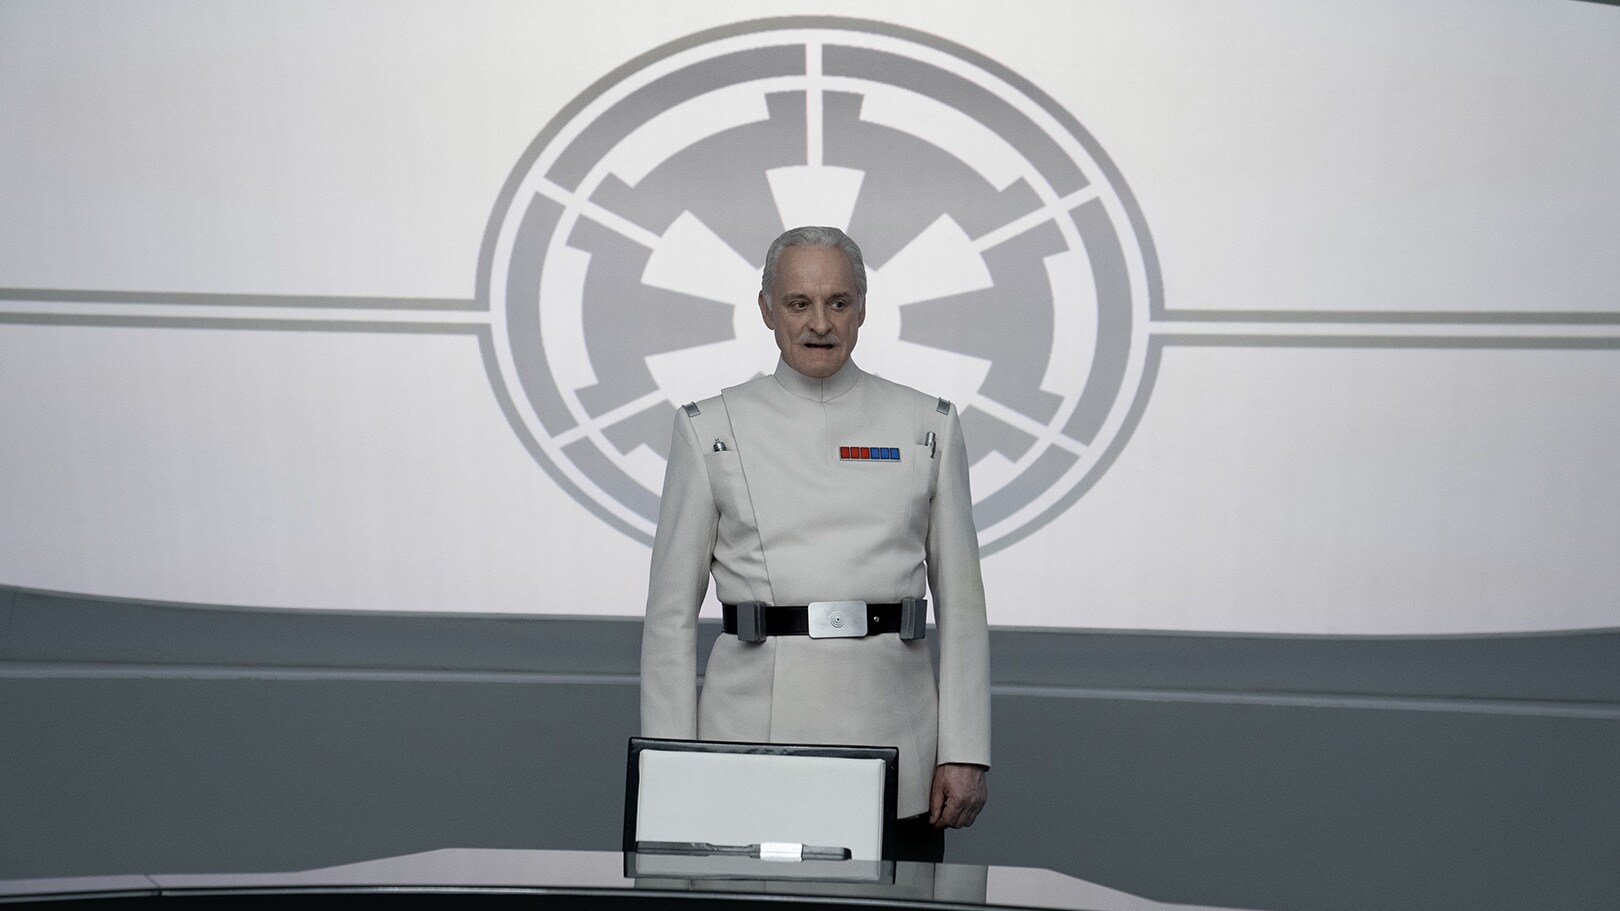 "We will make it clear that no one steals from the Empire." - Wullf Yularen